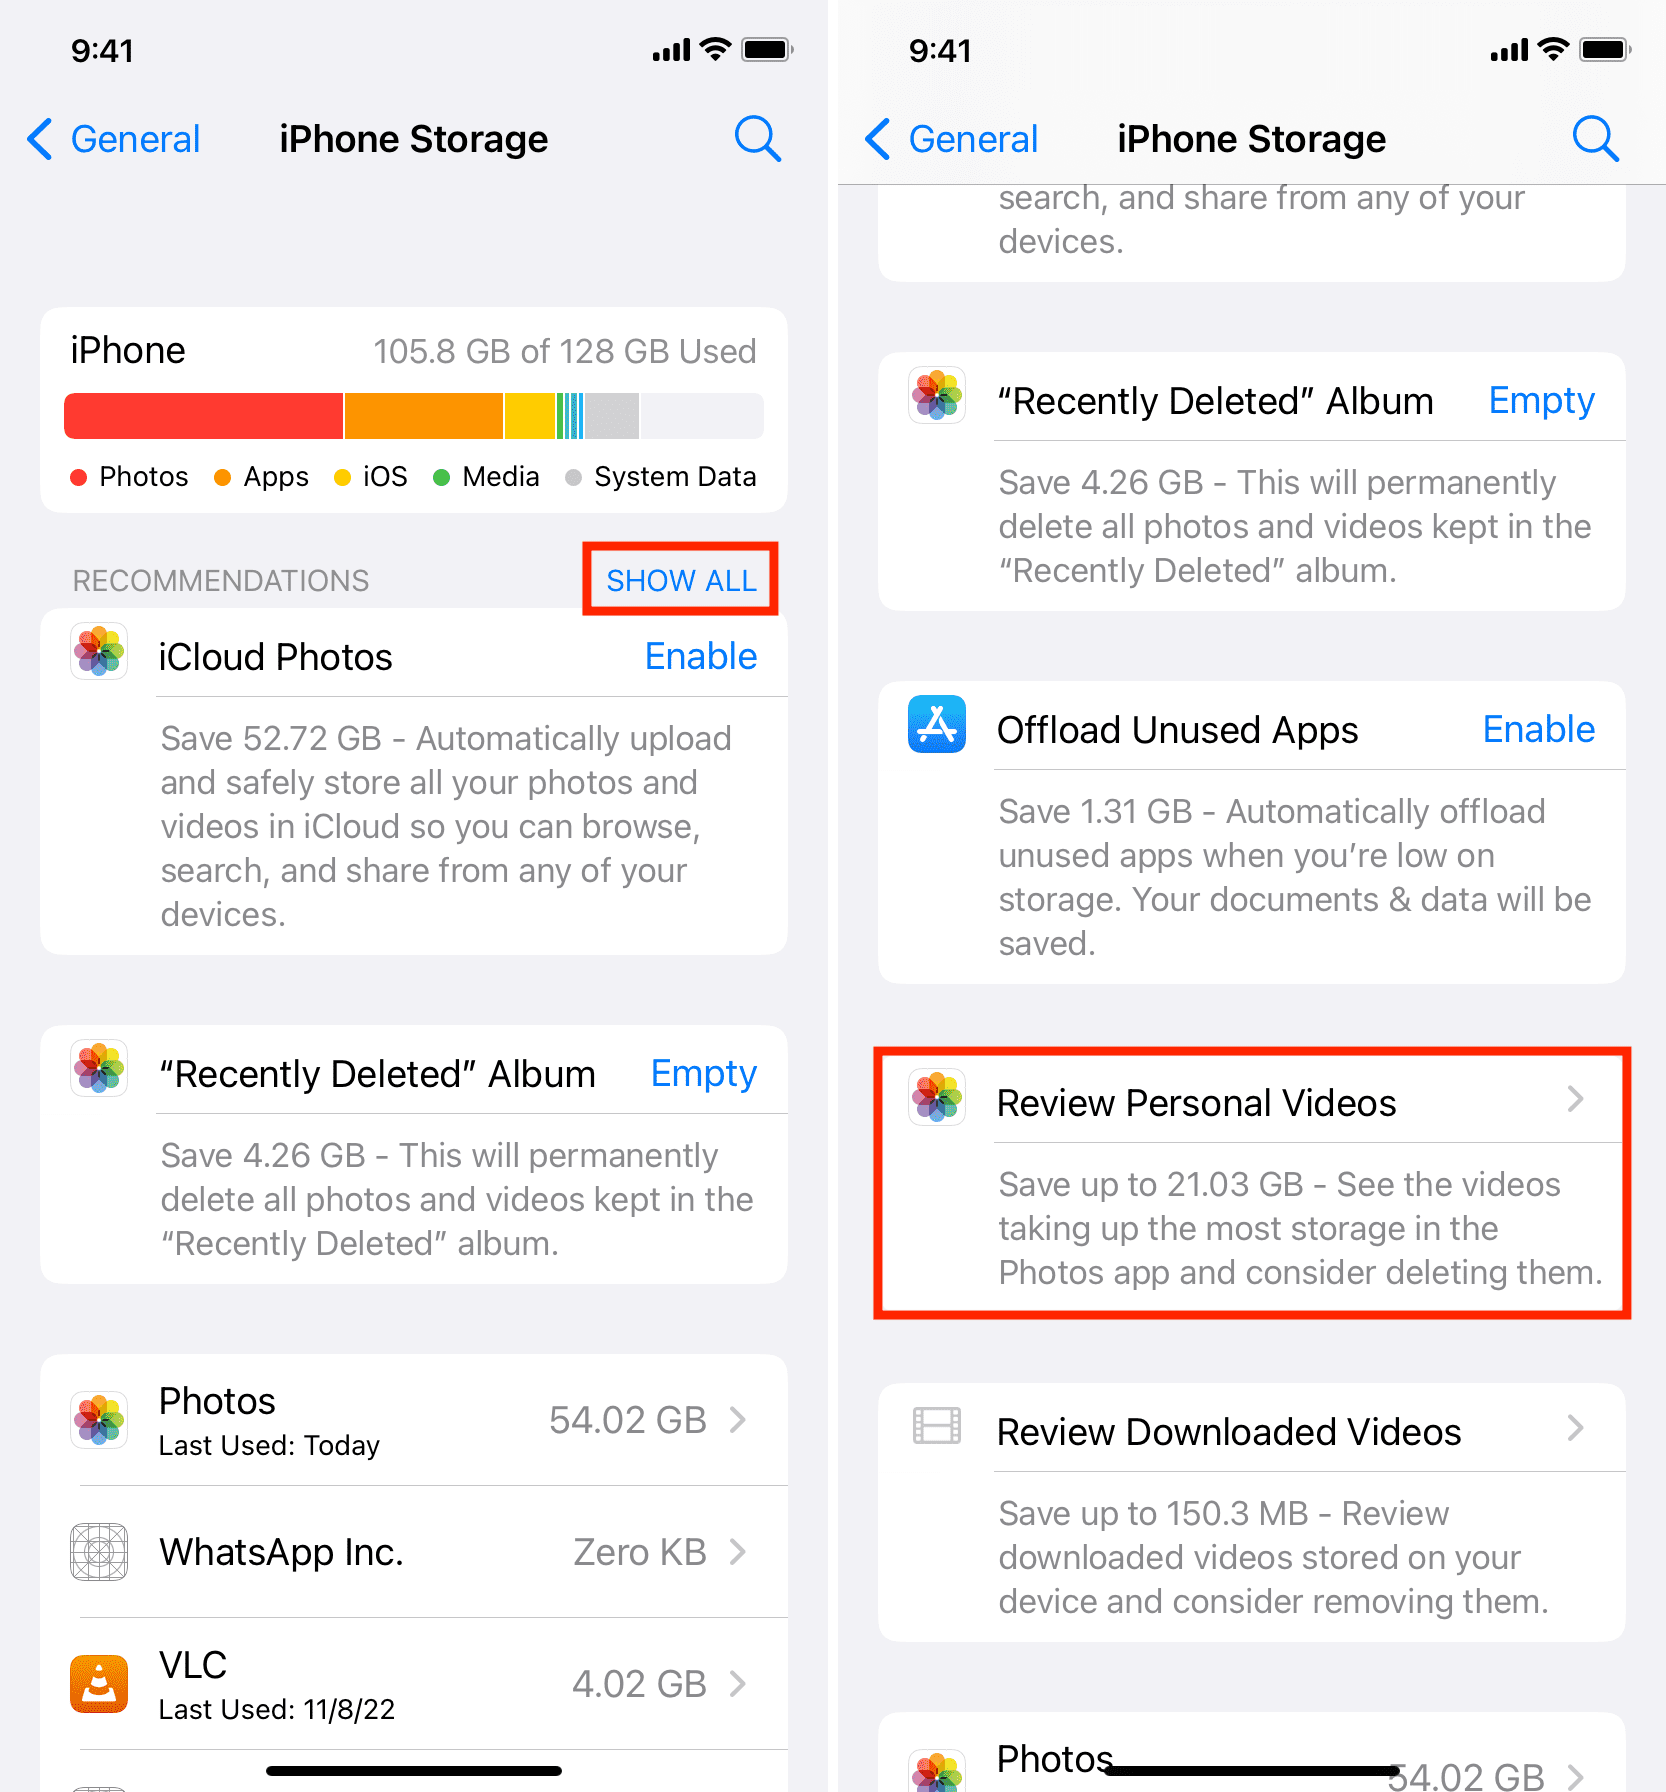 Review Downloaded Videos in iPhone storage settings